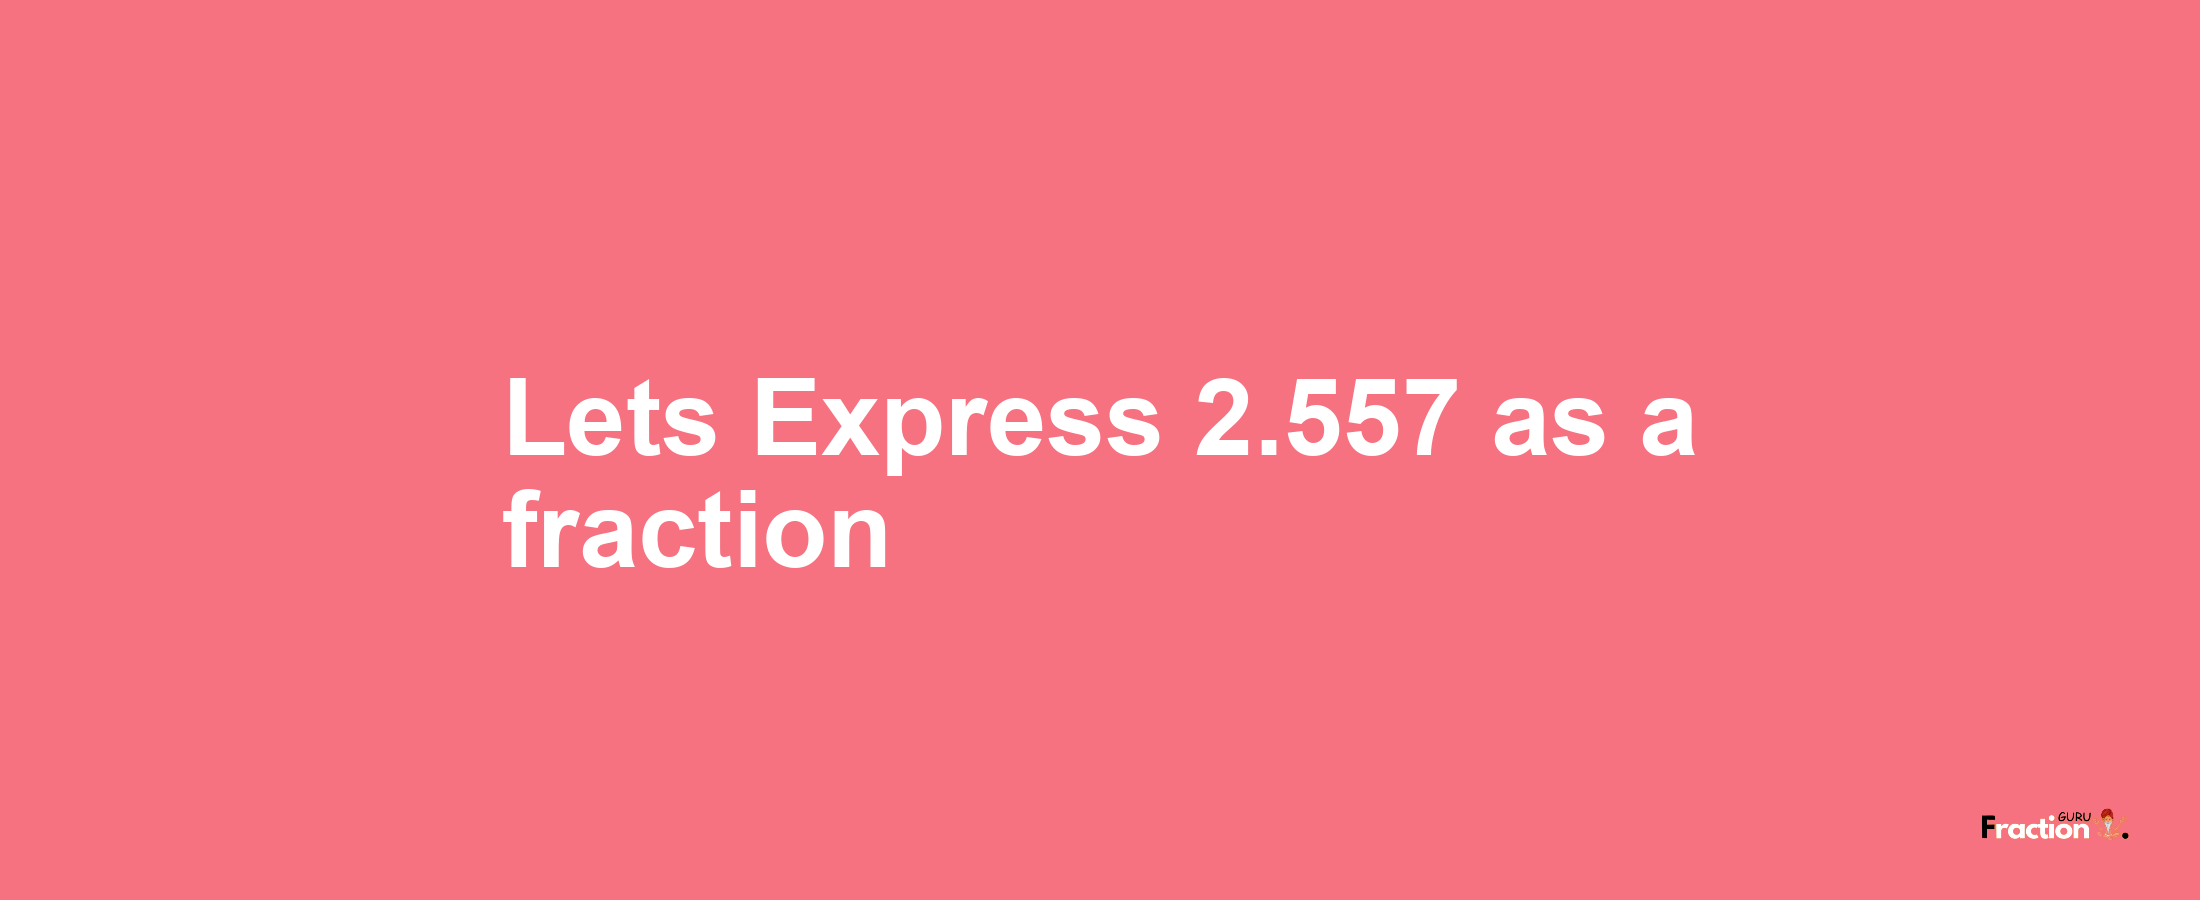 Lets Express 2.557 as afraction